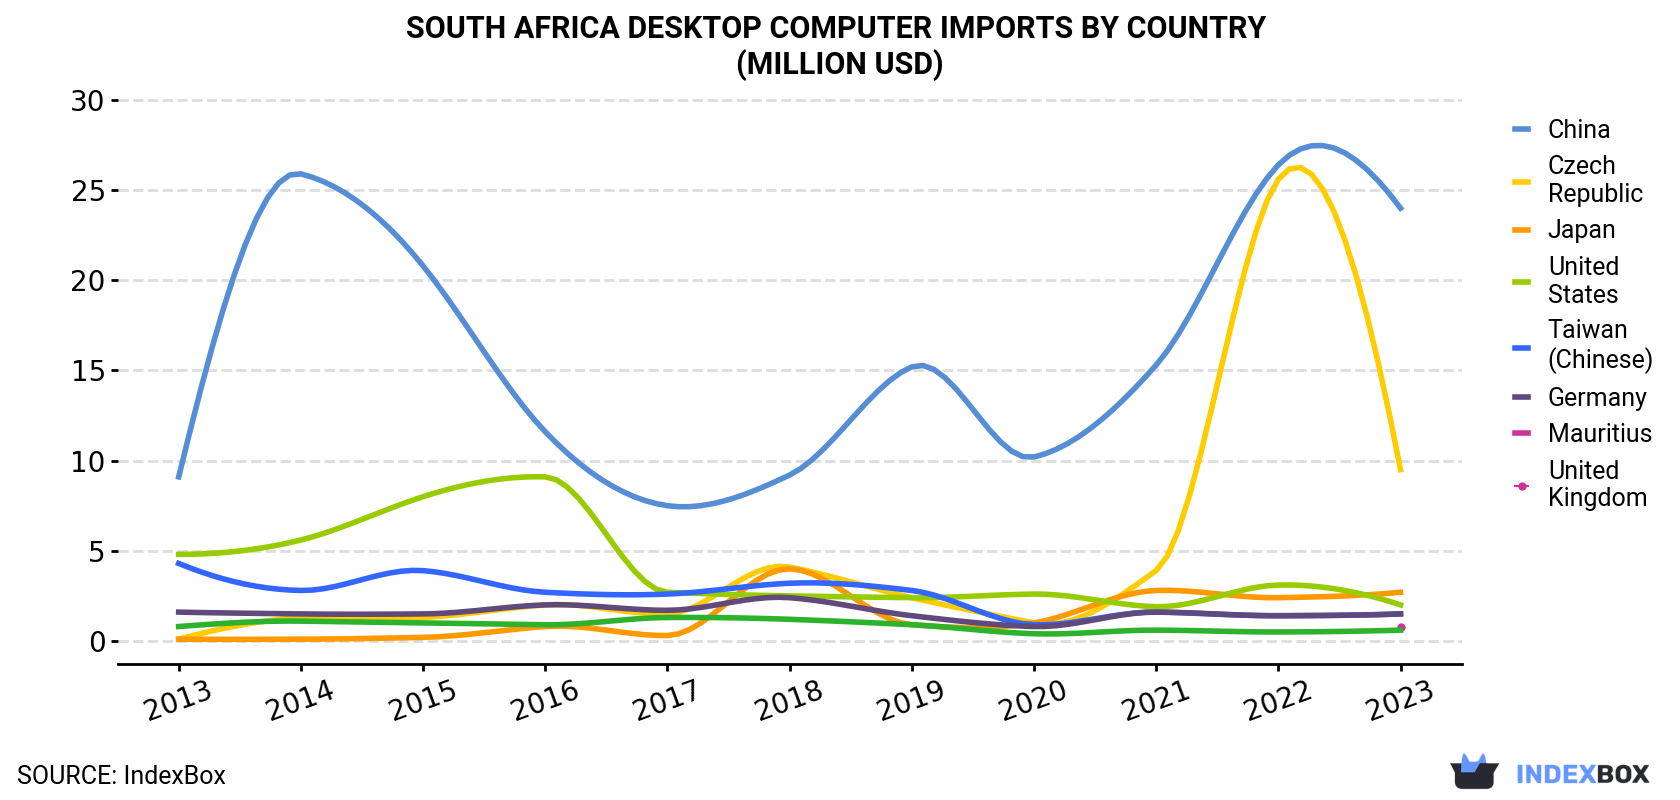 South Africa Desktop Computer Imports By Country (Million USD)